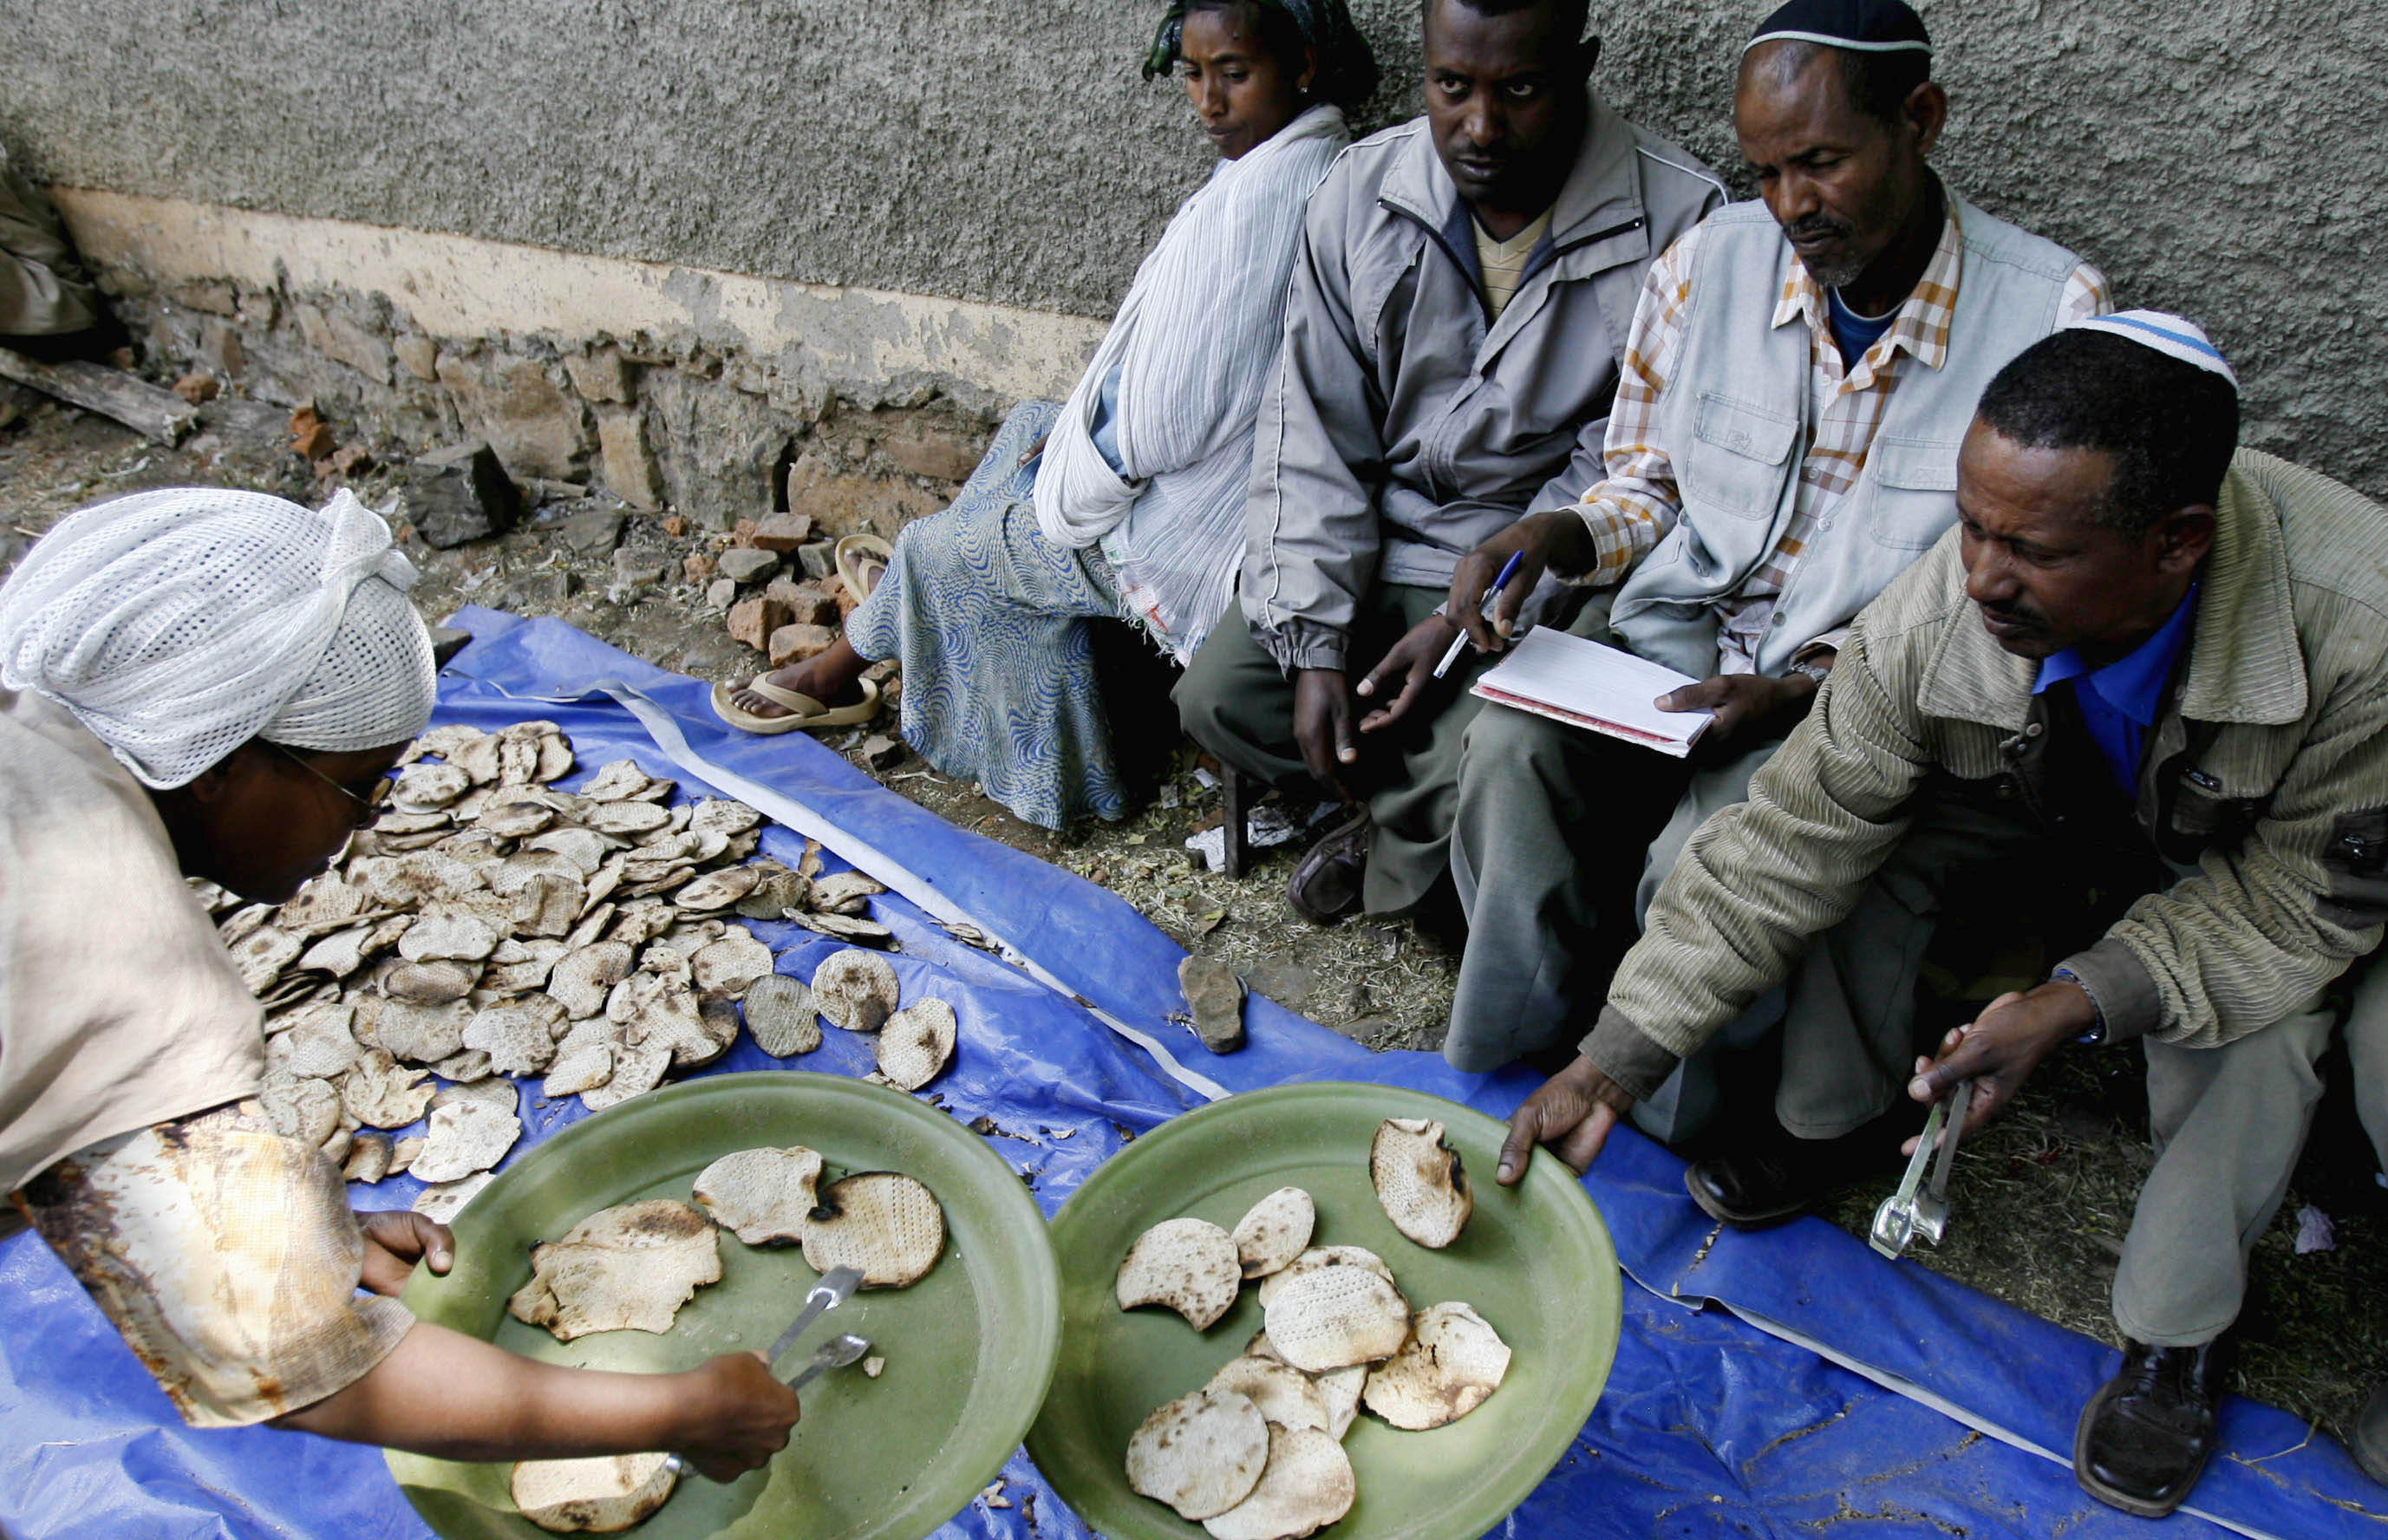 An Jewish Ethiopian woman gives matzahto a man ahead of Passover at a compound while awaiting immigration to Israel in Gondar March 9, 2007 (ELIANA APONTE/REUTERS).